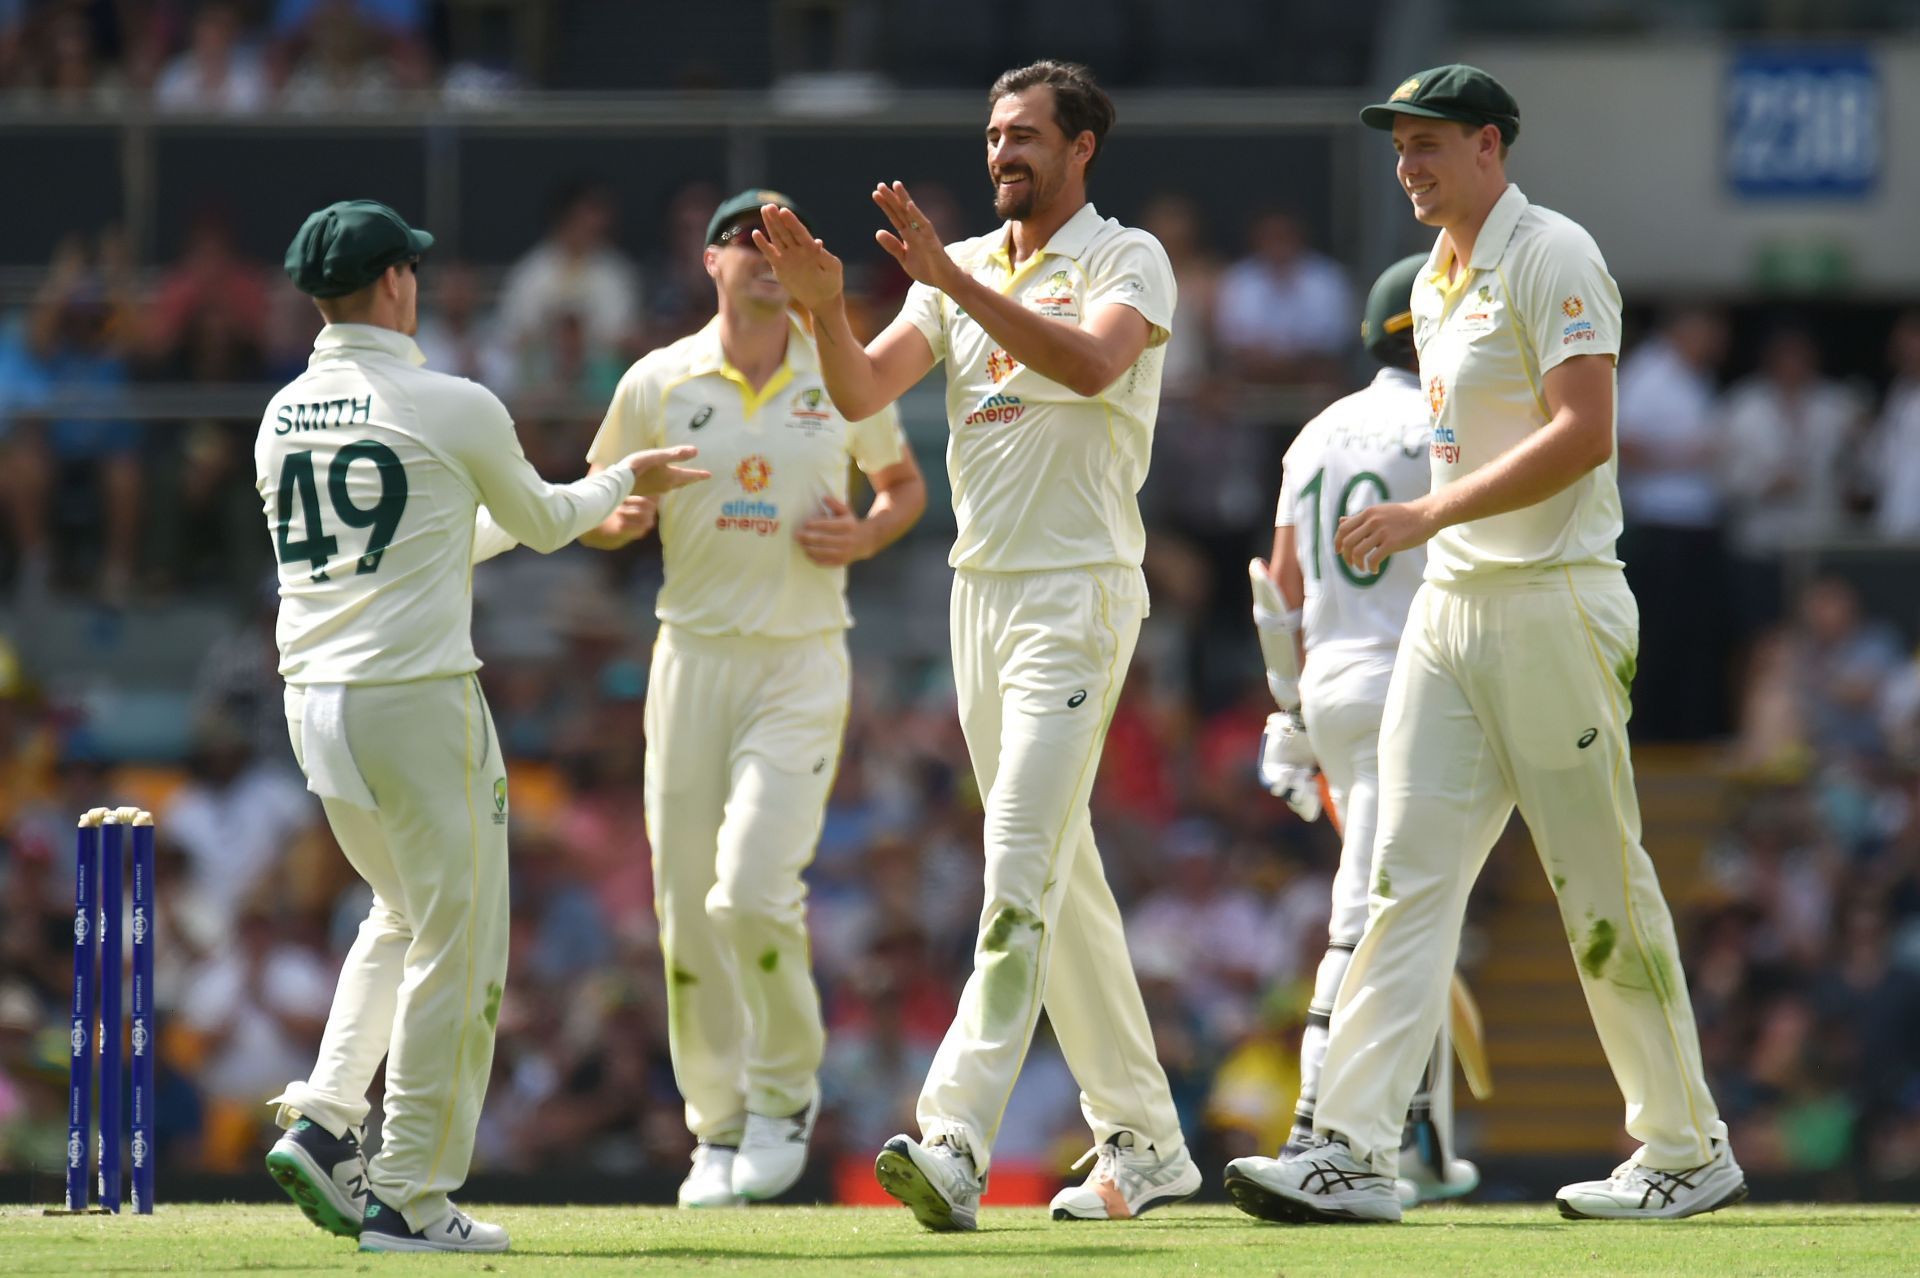 Australia v South Africa - First Test: Day 2 (Image: Getty)